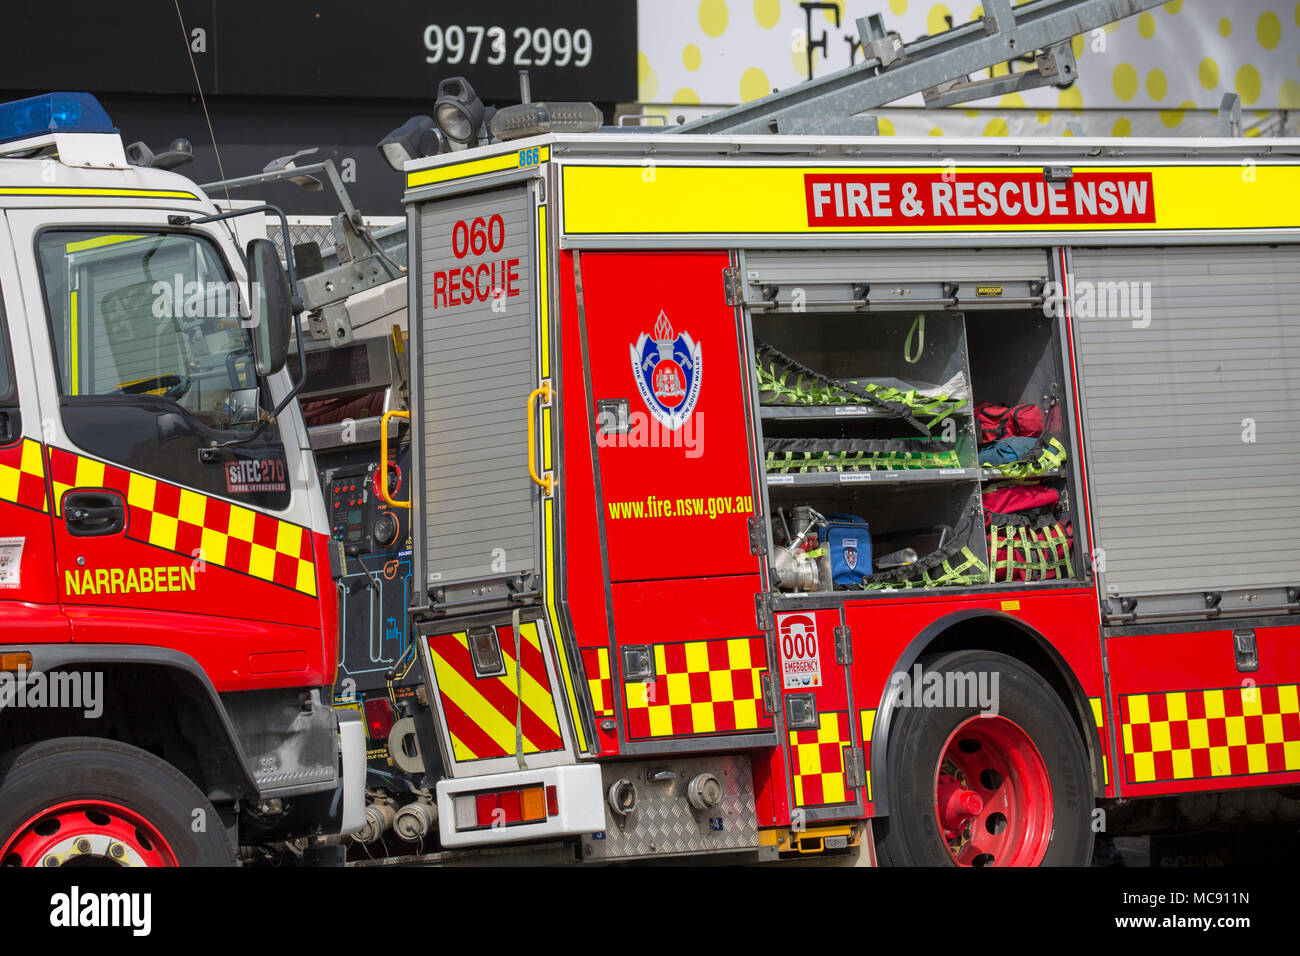 fire-and-rescue-new-south-wales-responding-to-an-emergency-in-sydney-nsw-australia-stock-photo